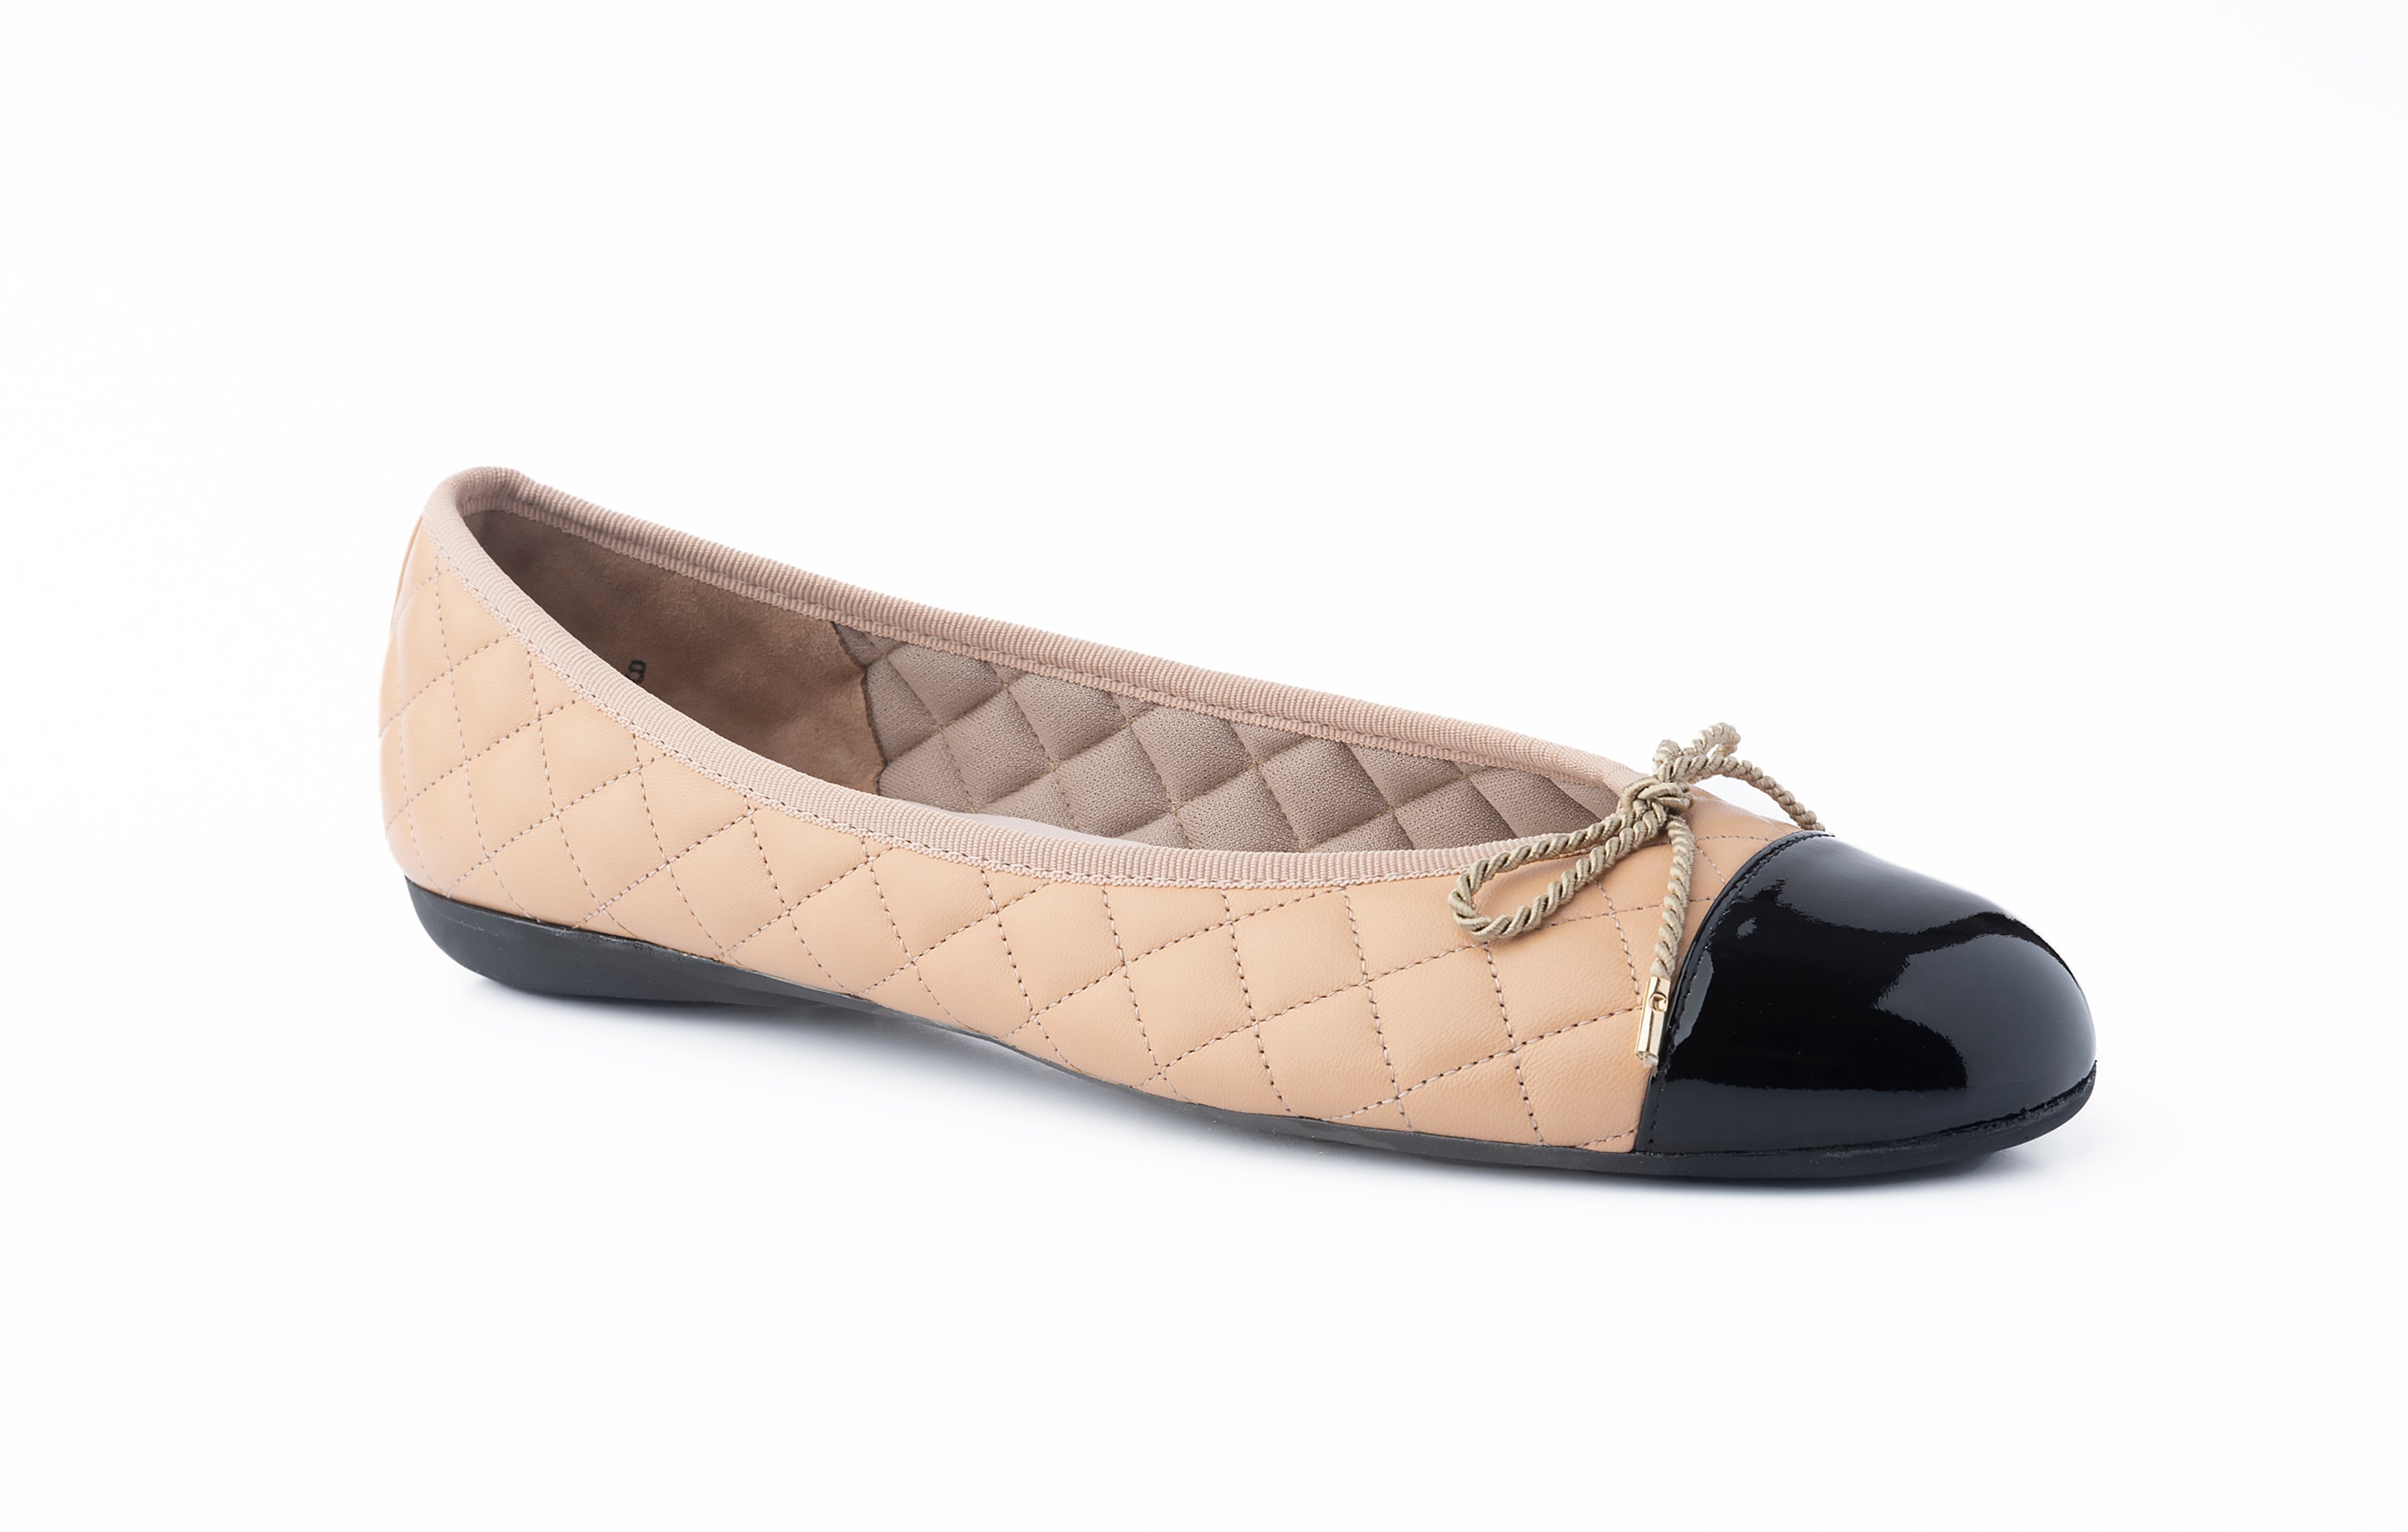 Paul Mayer - Best Quilted Leather Ballet FLAT/BROWN / 8.5